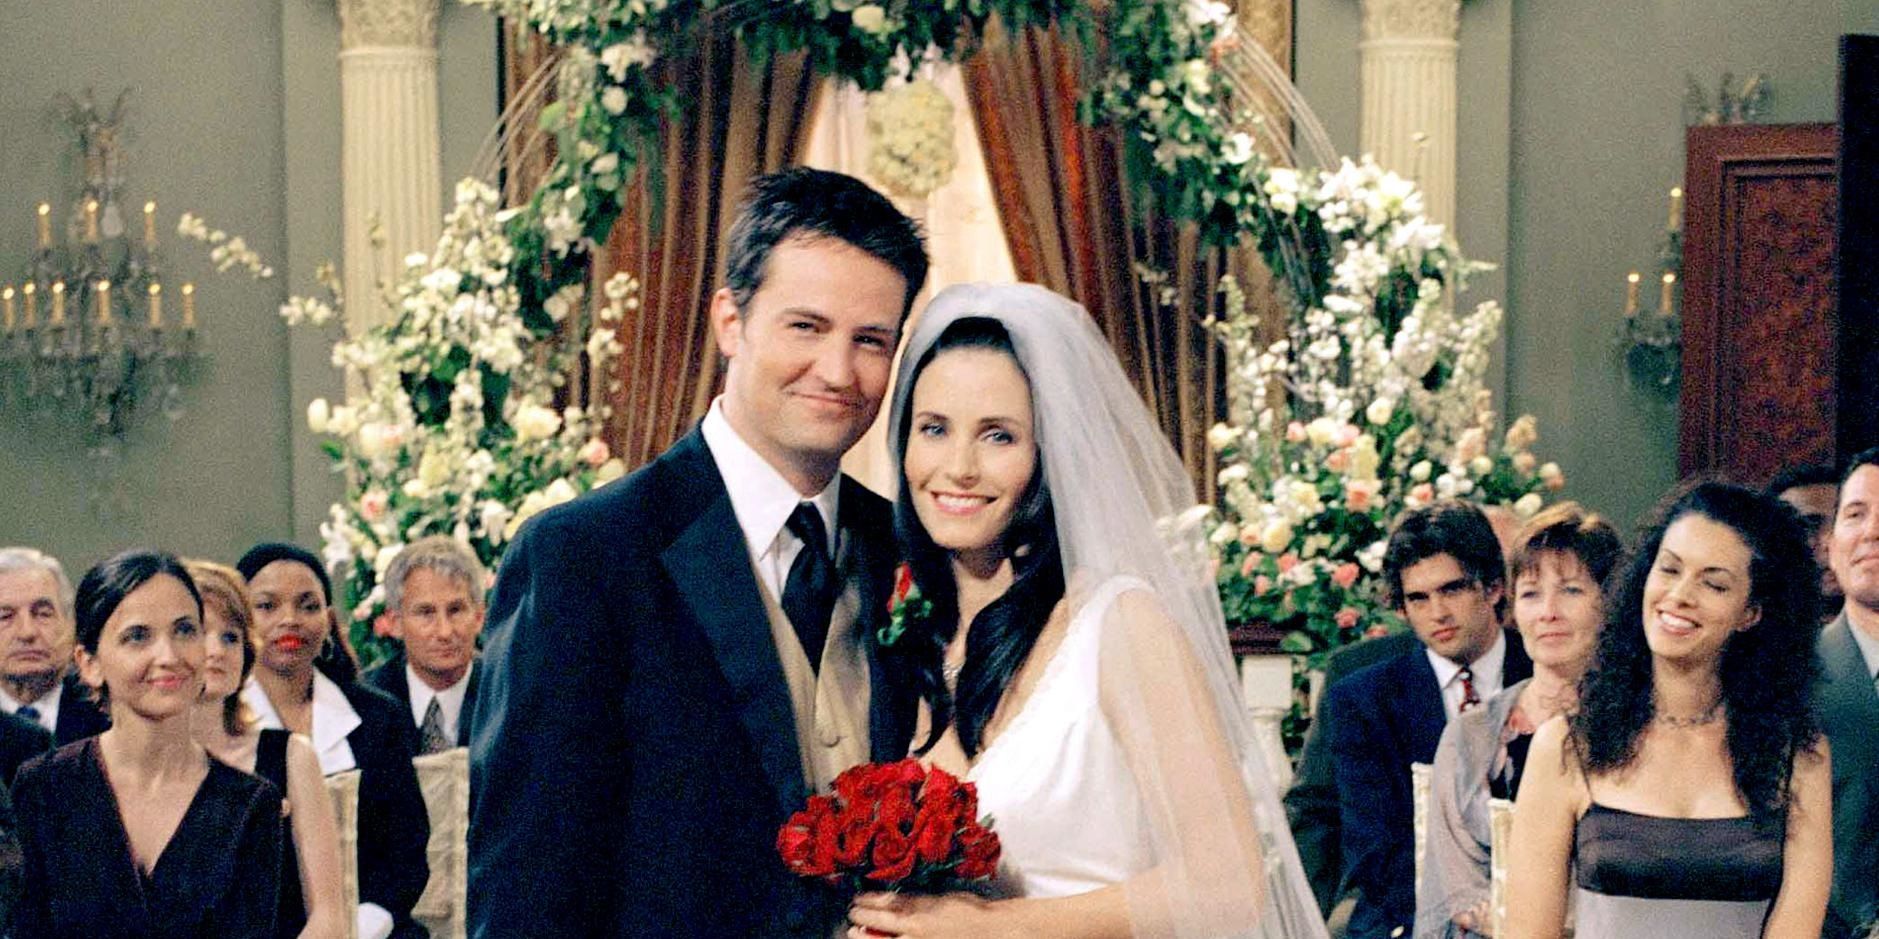 Chandler and Monica pose for a photo after their wedding in Friends